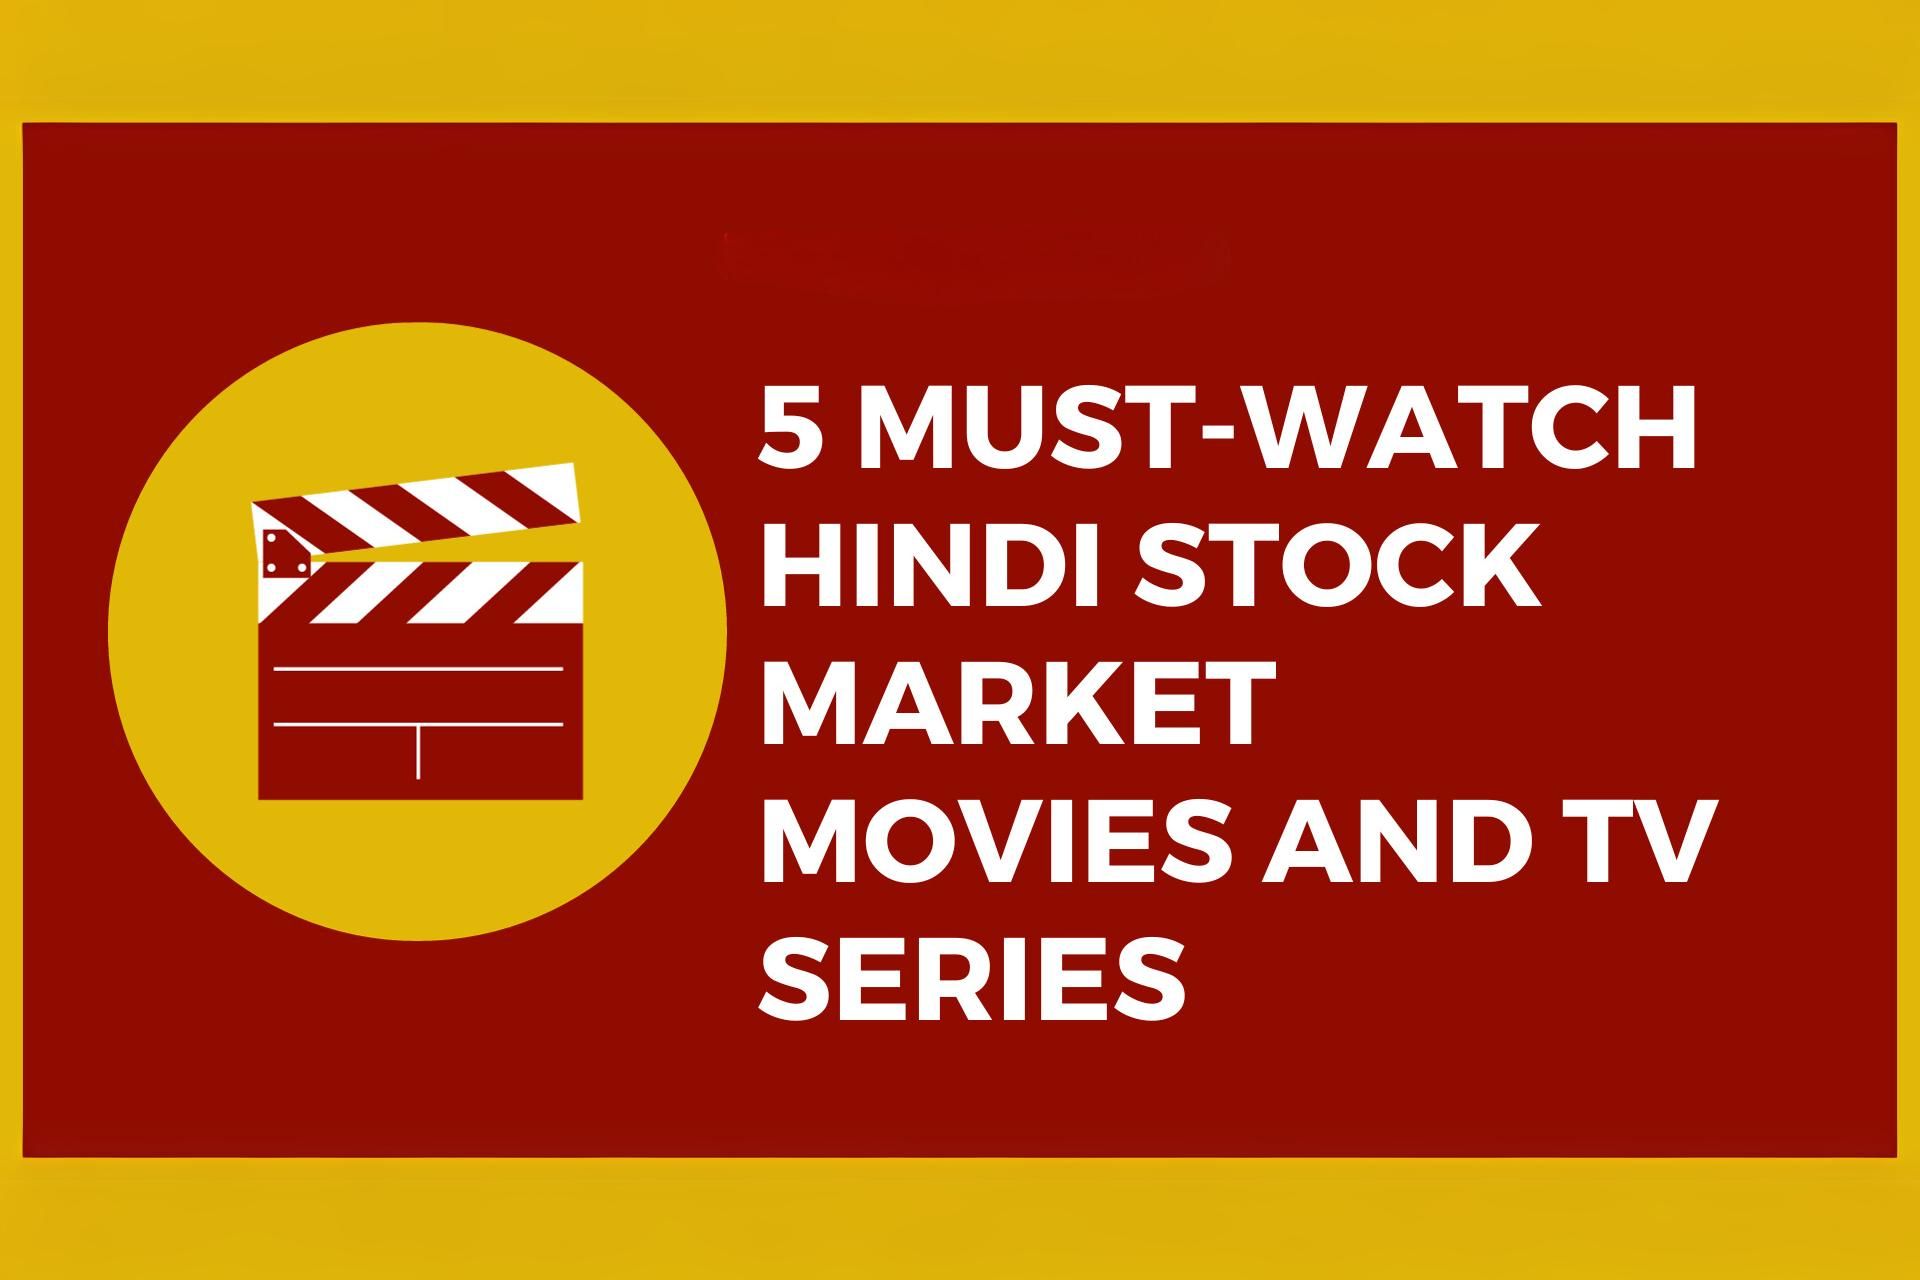 5 Must-Watch Hindi Stock Market Movies and TV Series